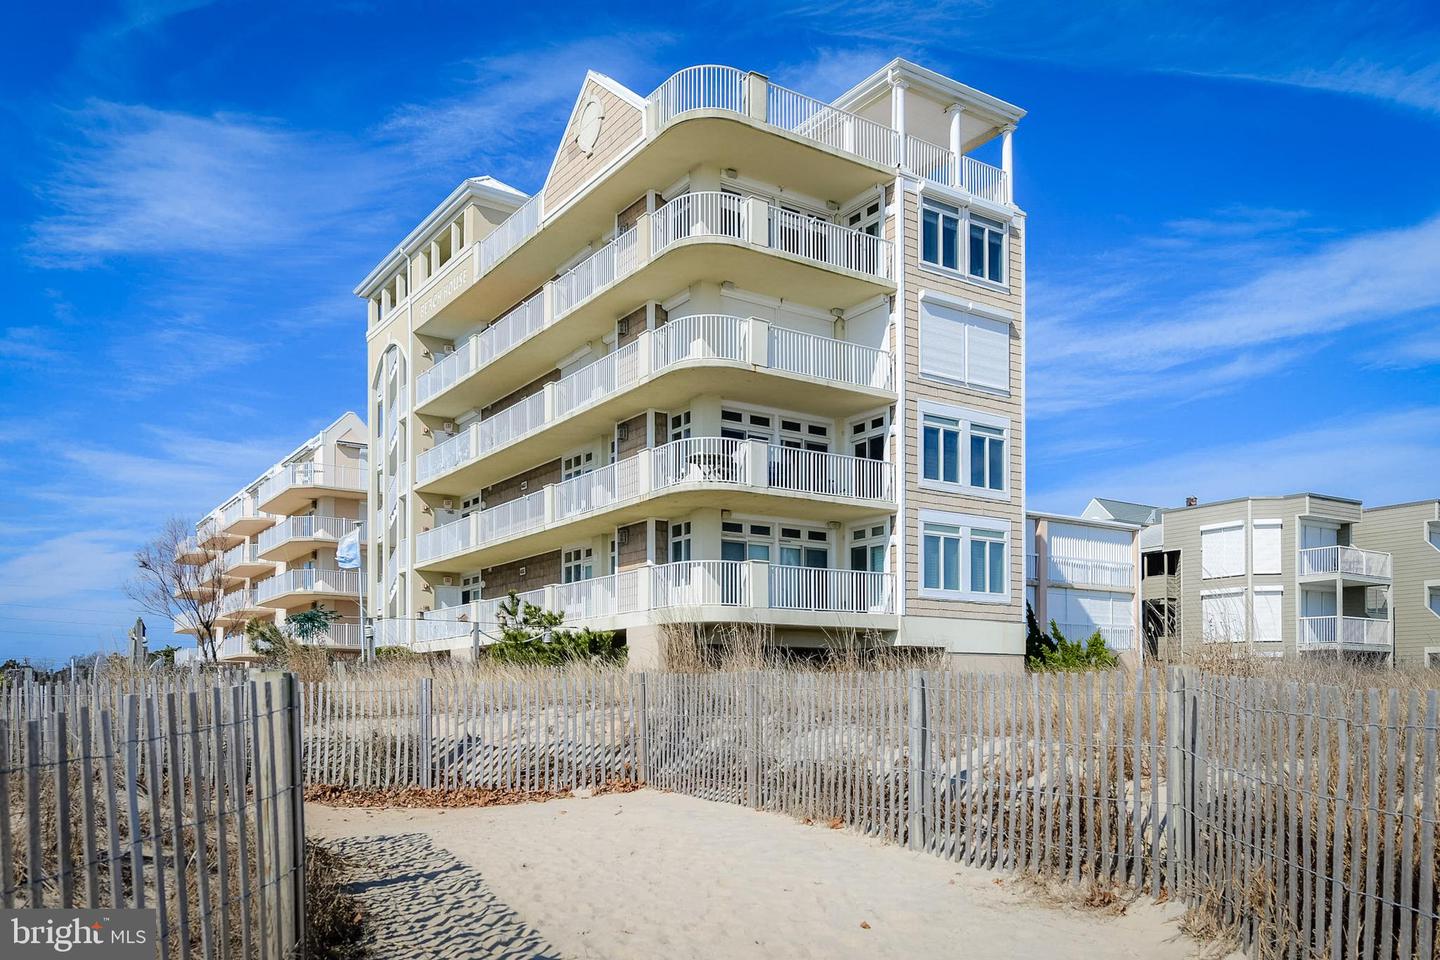 view from beach dunes of multi floored vacation rental condos